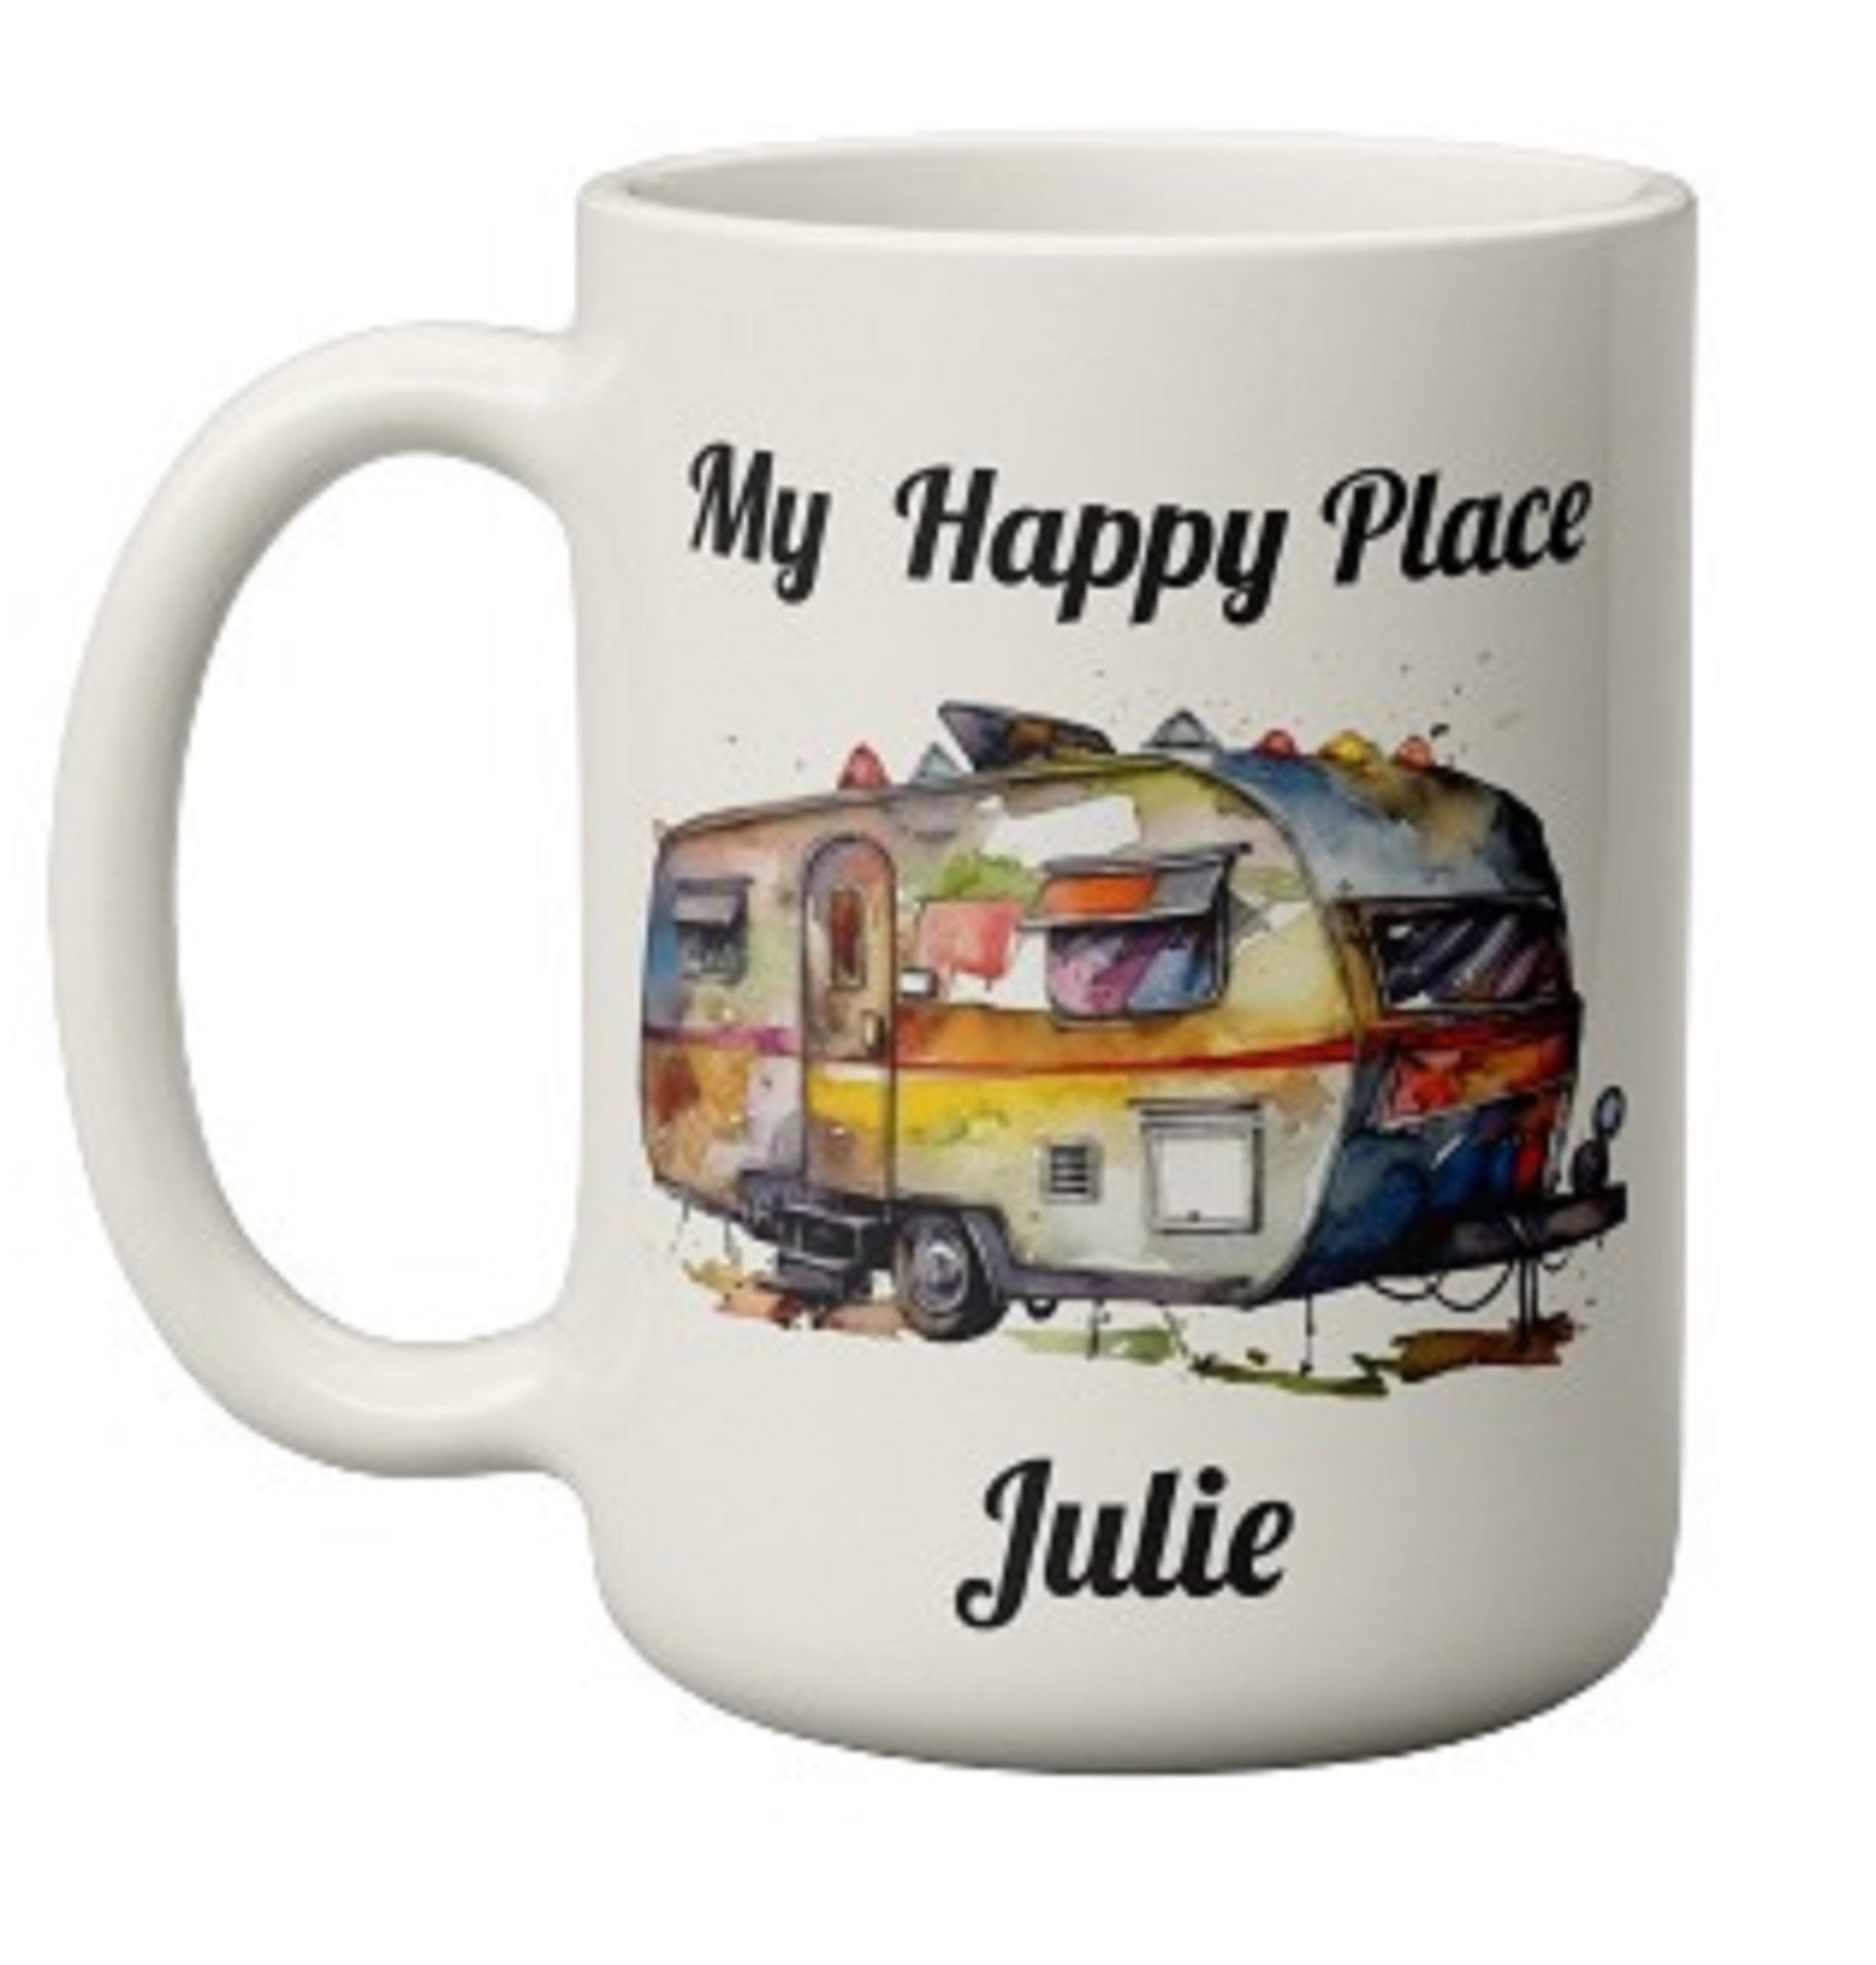  Personalized Caravan Mug - My Happy Place by Free Spirit Accessories sold by Free Spirit Accessories